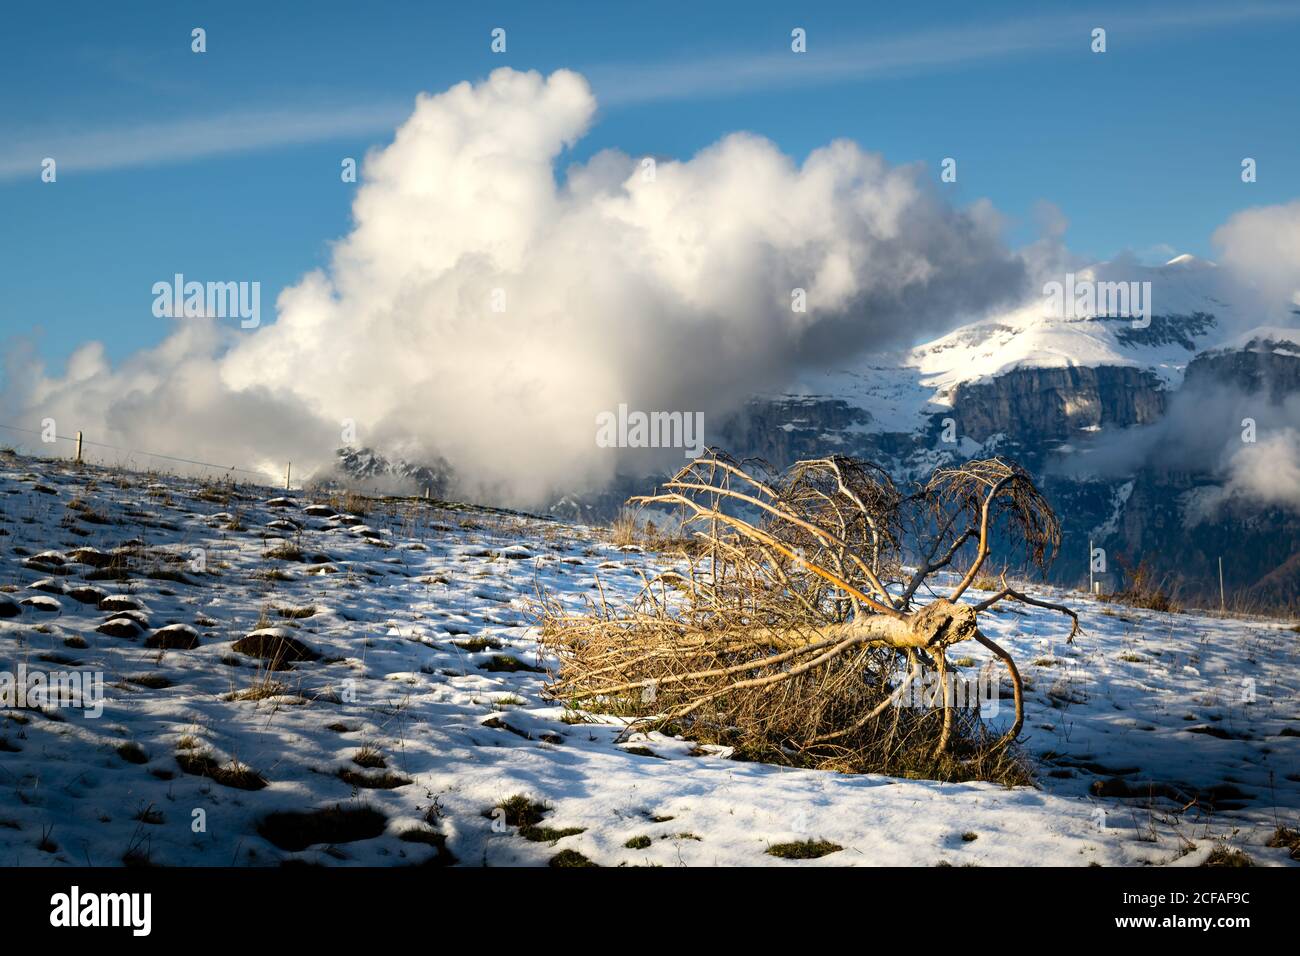 Remains of uprooted fir lie in the snow. In the background the mountains shrouded in clouds. Tree ravaged by the fury of storm Vaia. Stock Photo